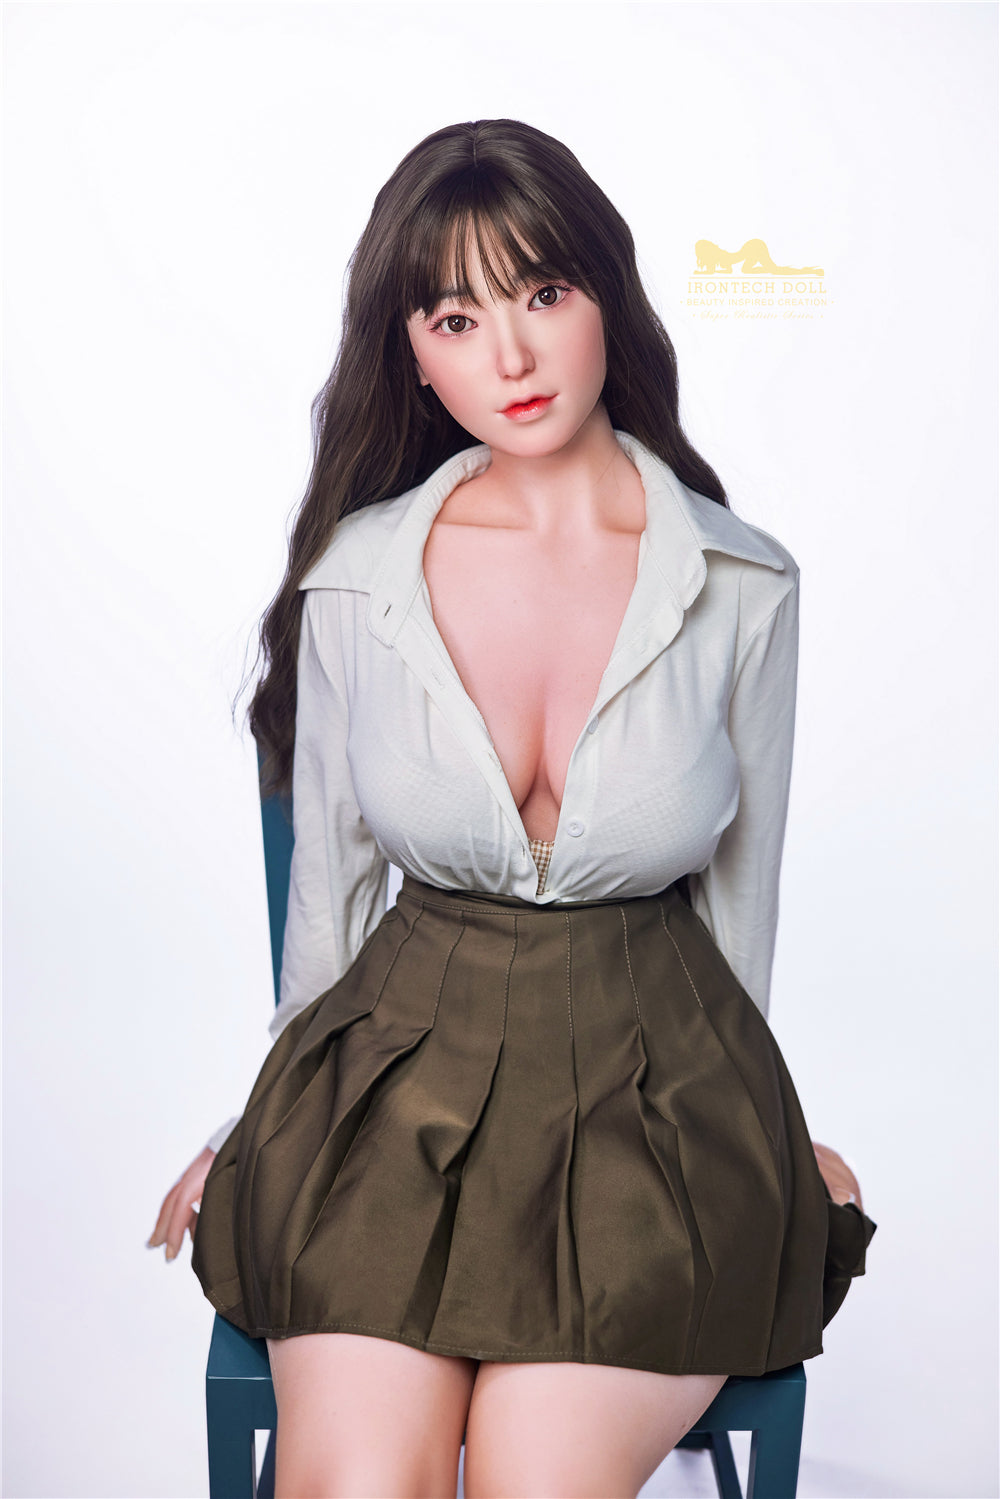 Irontech Doll 153 cm Silicone - Clementine | Sex Dolls SG